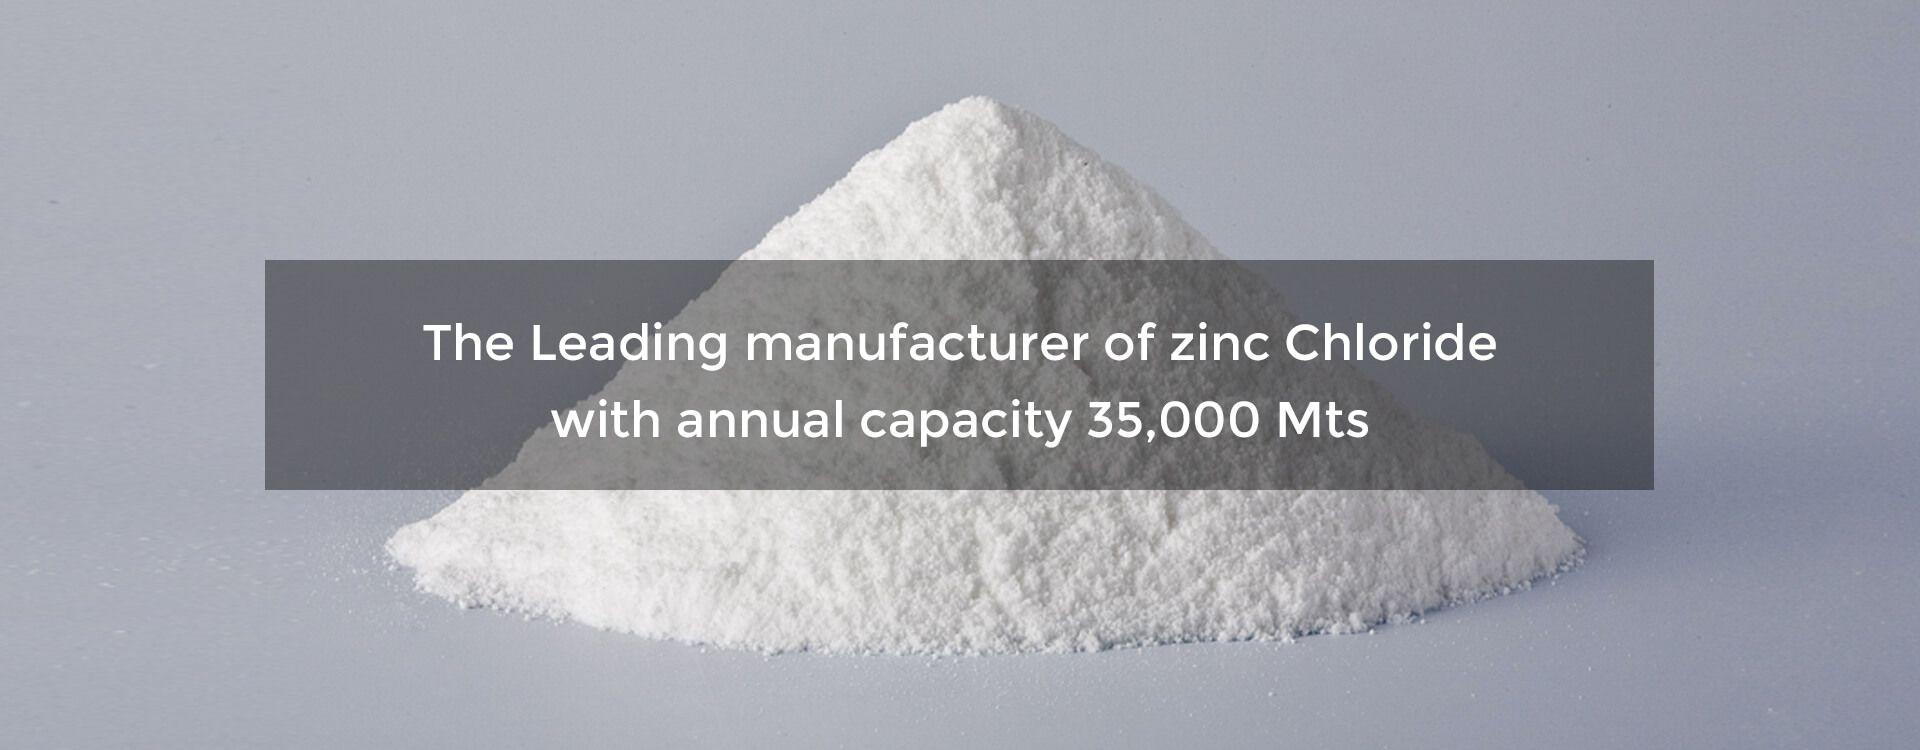 The Leading manufacturer of zinc chloride with annual capacity 35,000 Mts